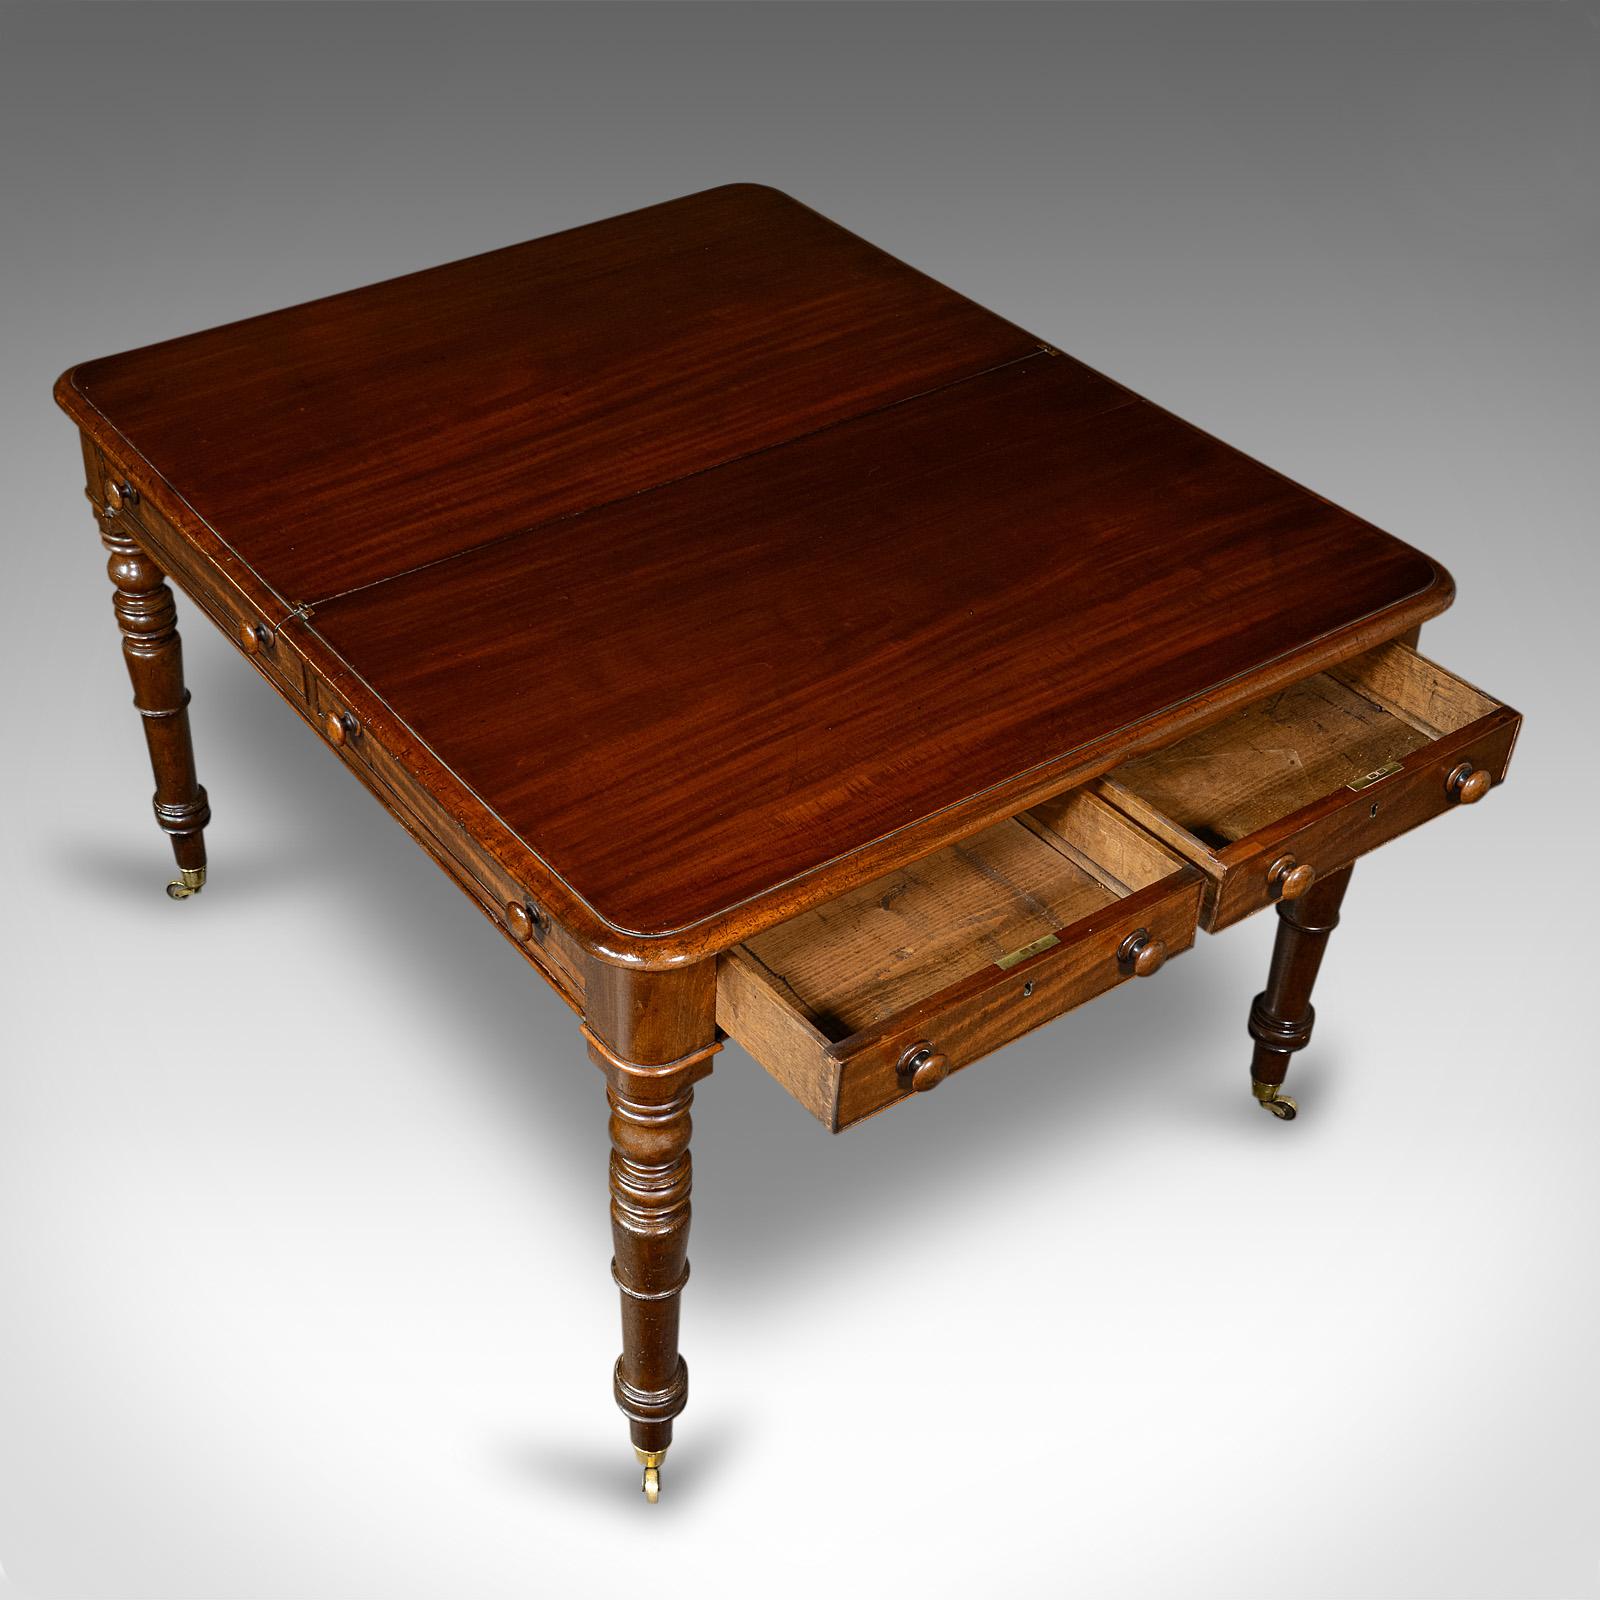 Wood Antique Cartographer's Folio Table, English, Lift Over, Library, Desk, Georgian For Sale